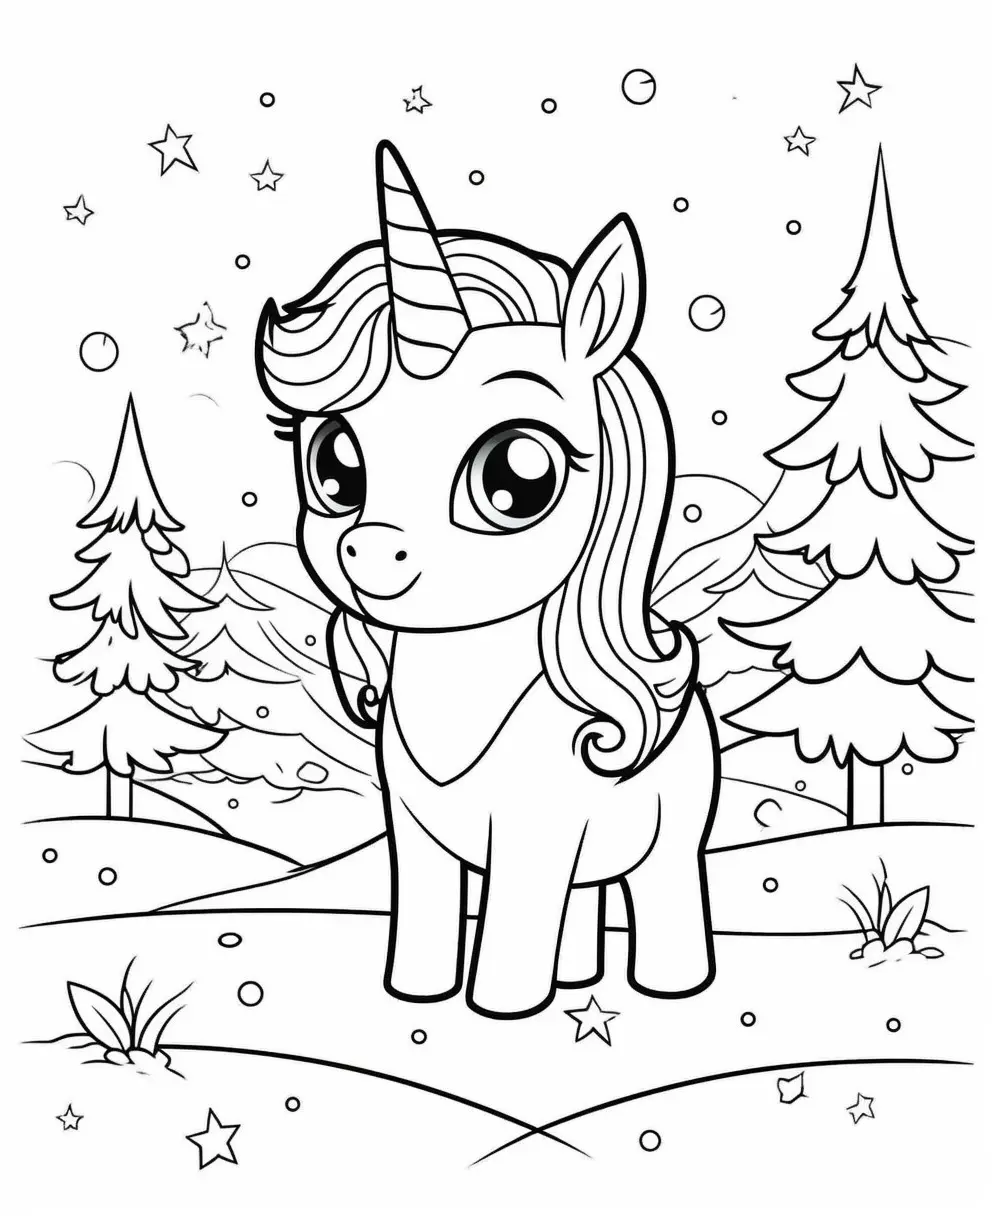 Unicorn adventures - Coloring pages Child